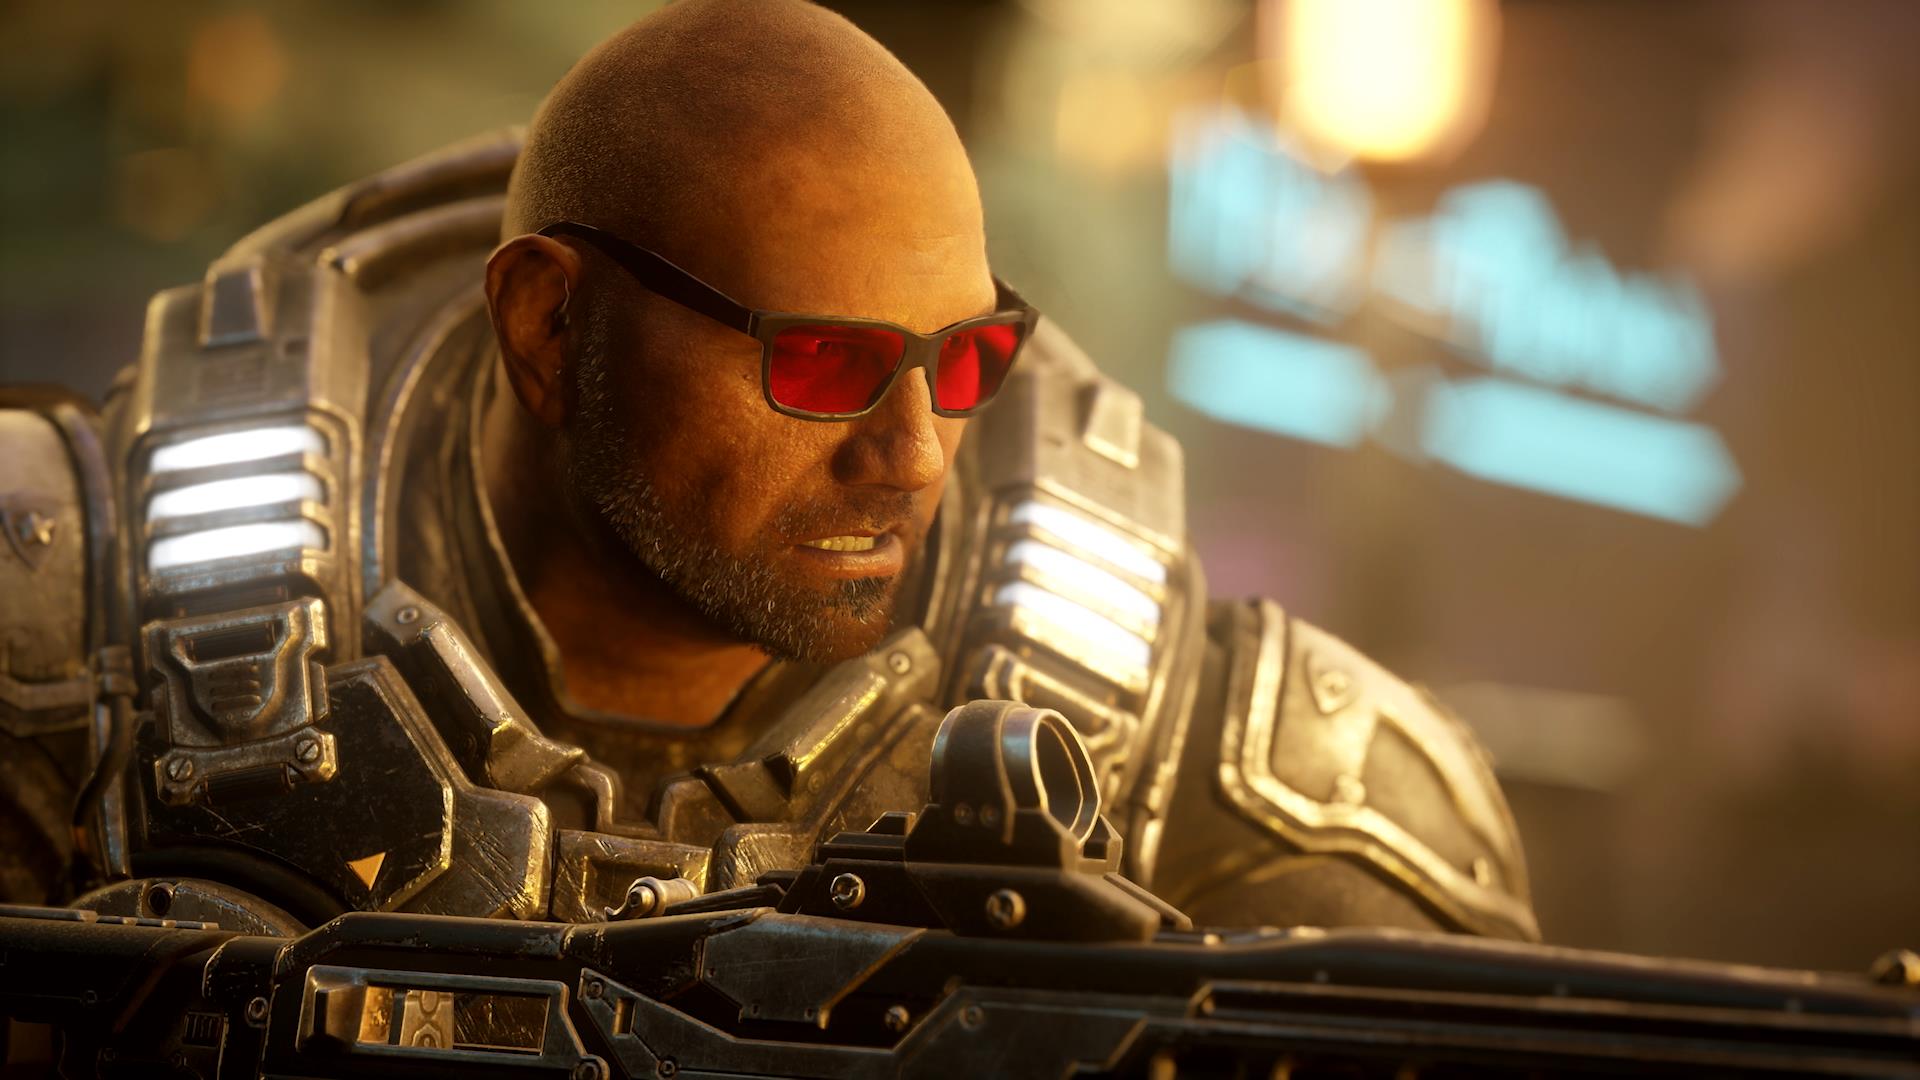 Image for Batista skin is now available in Gears 5